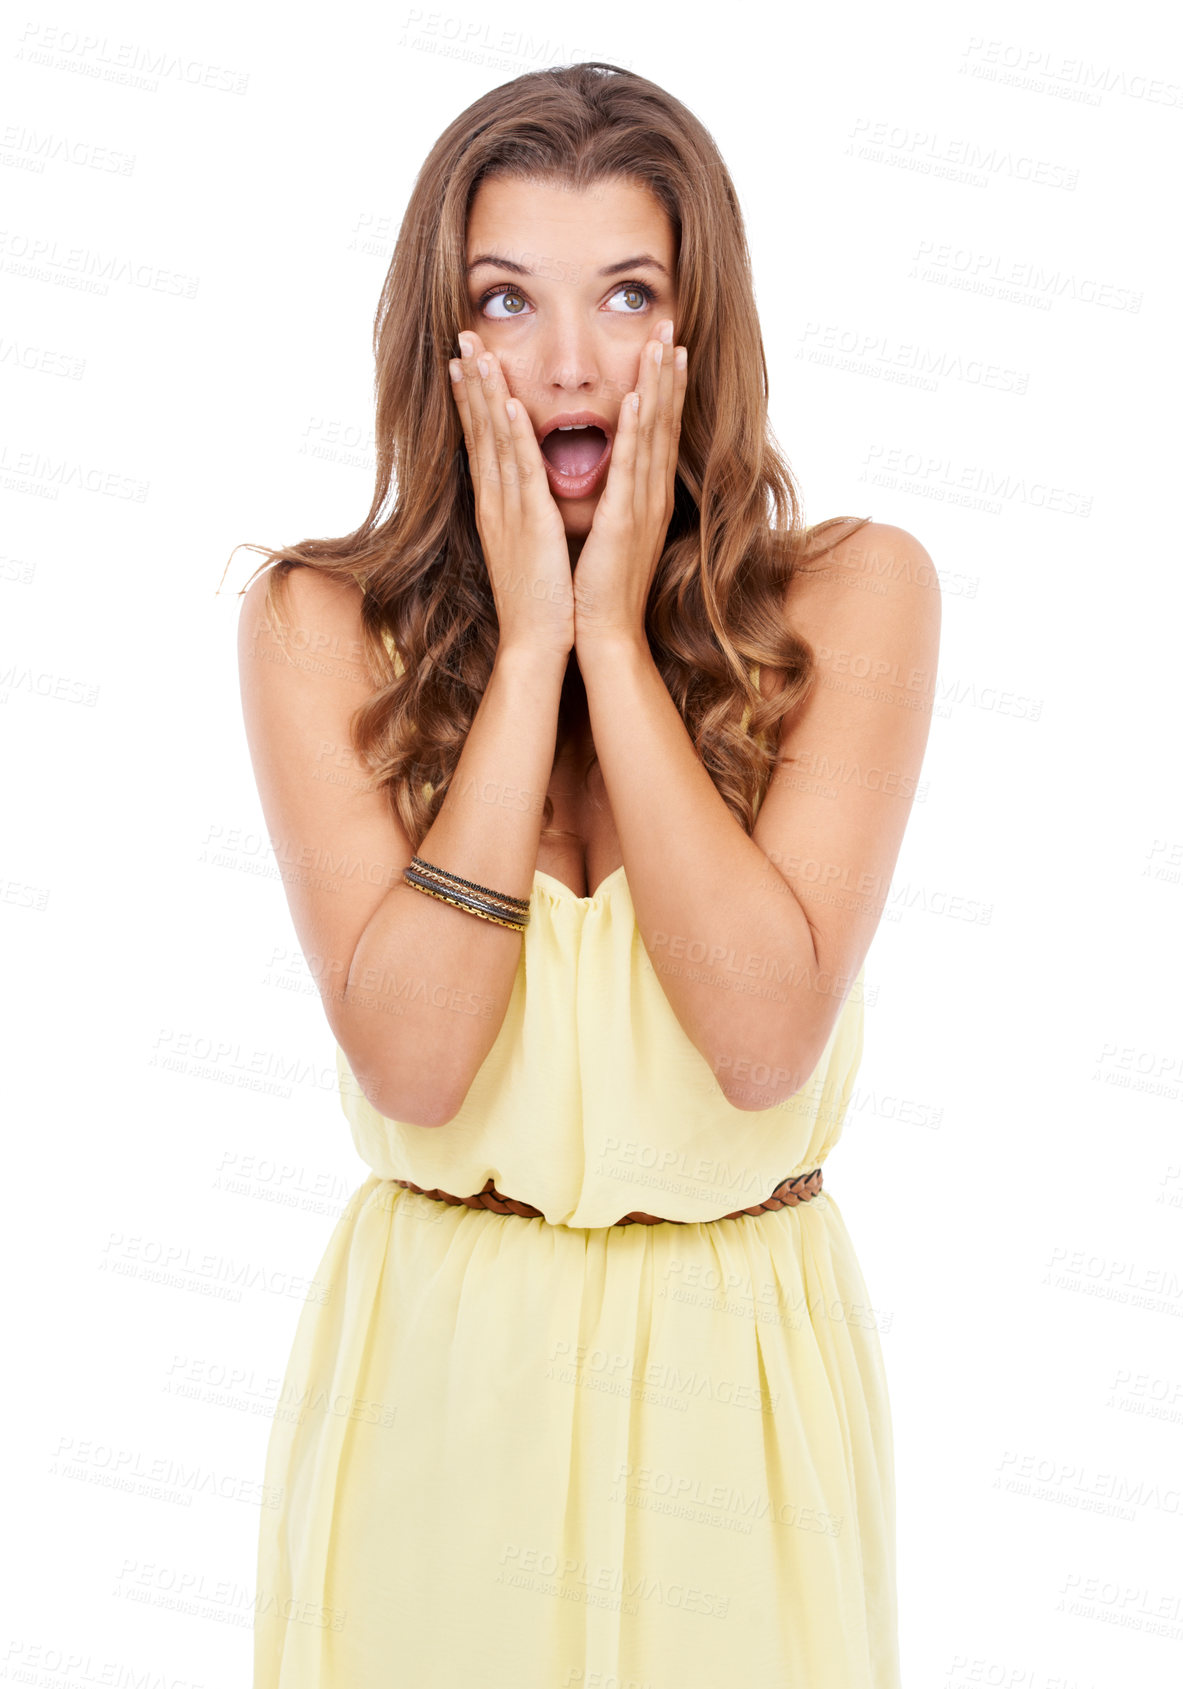 Buy stock photo Attractive young woman standing with a shocked expression on isolated background